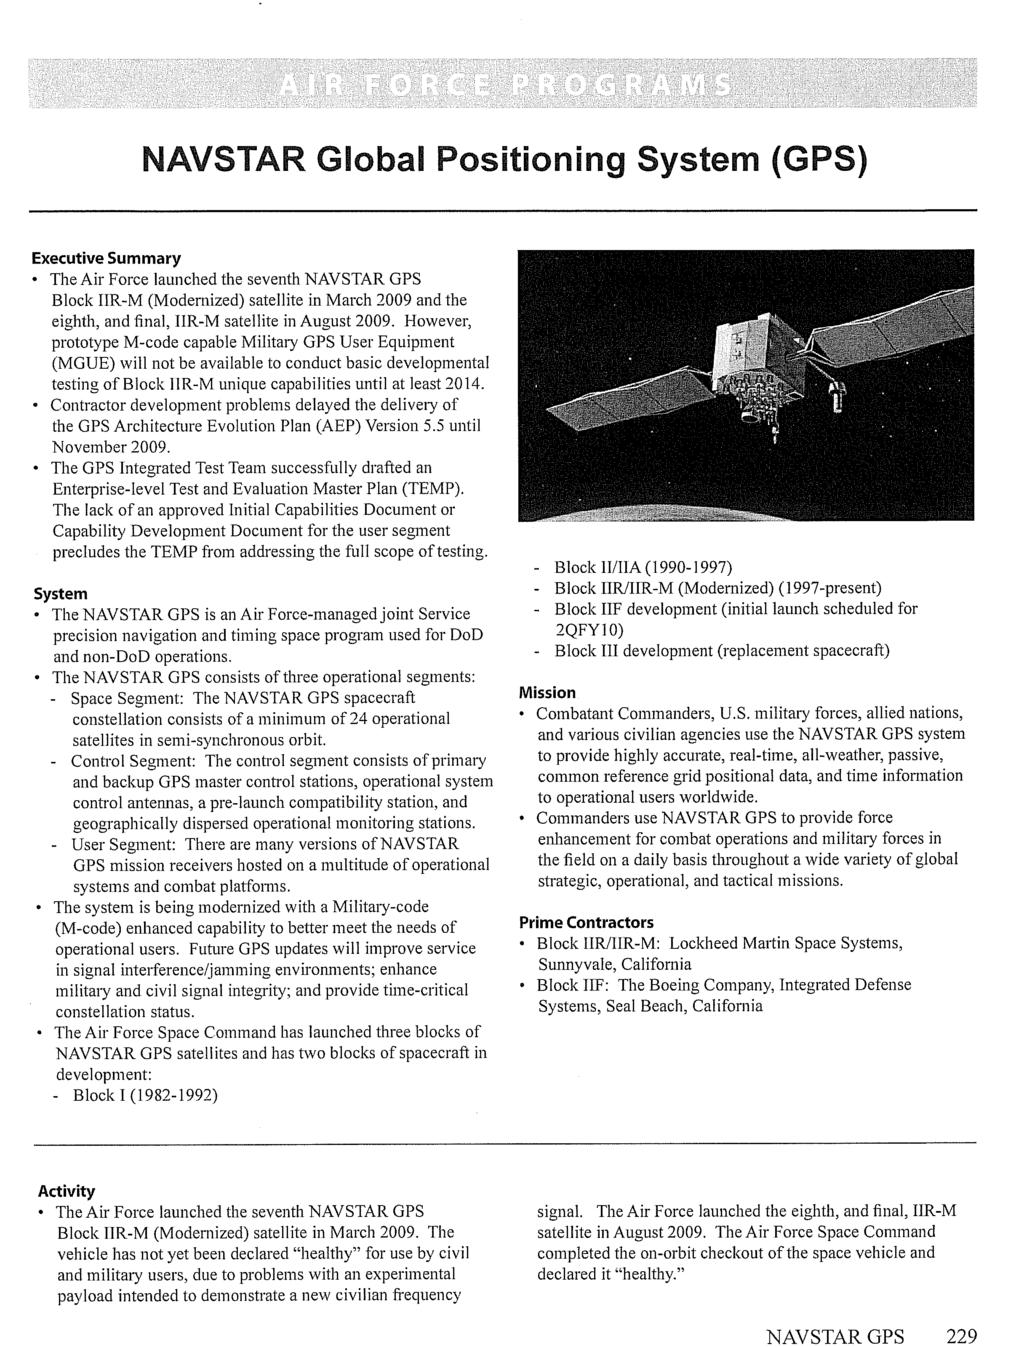 NAVSTAR GPS 229 NAVSTAR Global Positioning System (GPS) Executive Summary The Air Force launched the seventh NAVSTAR GPS Block IIR-M (Modernized) satellite in March 2009 and the eighth, and final,